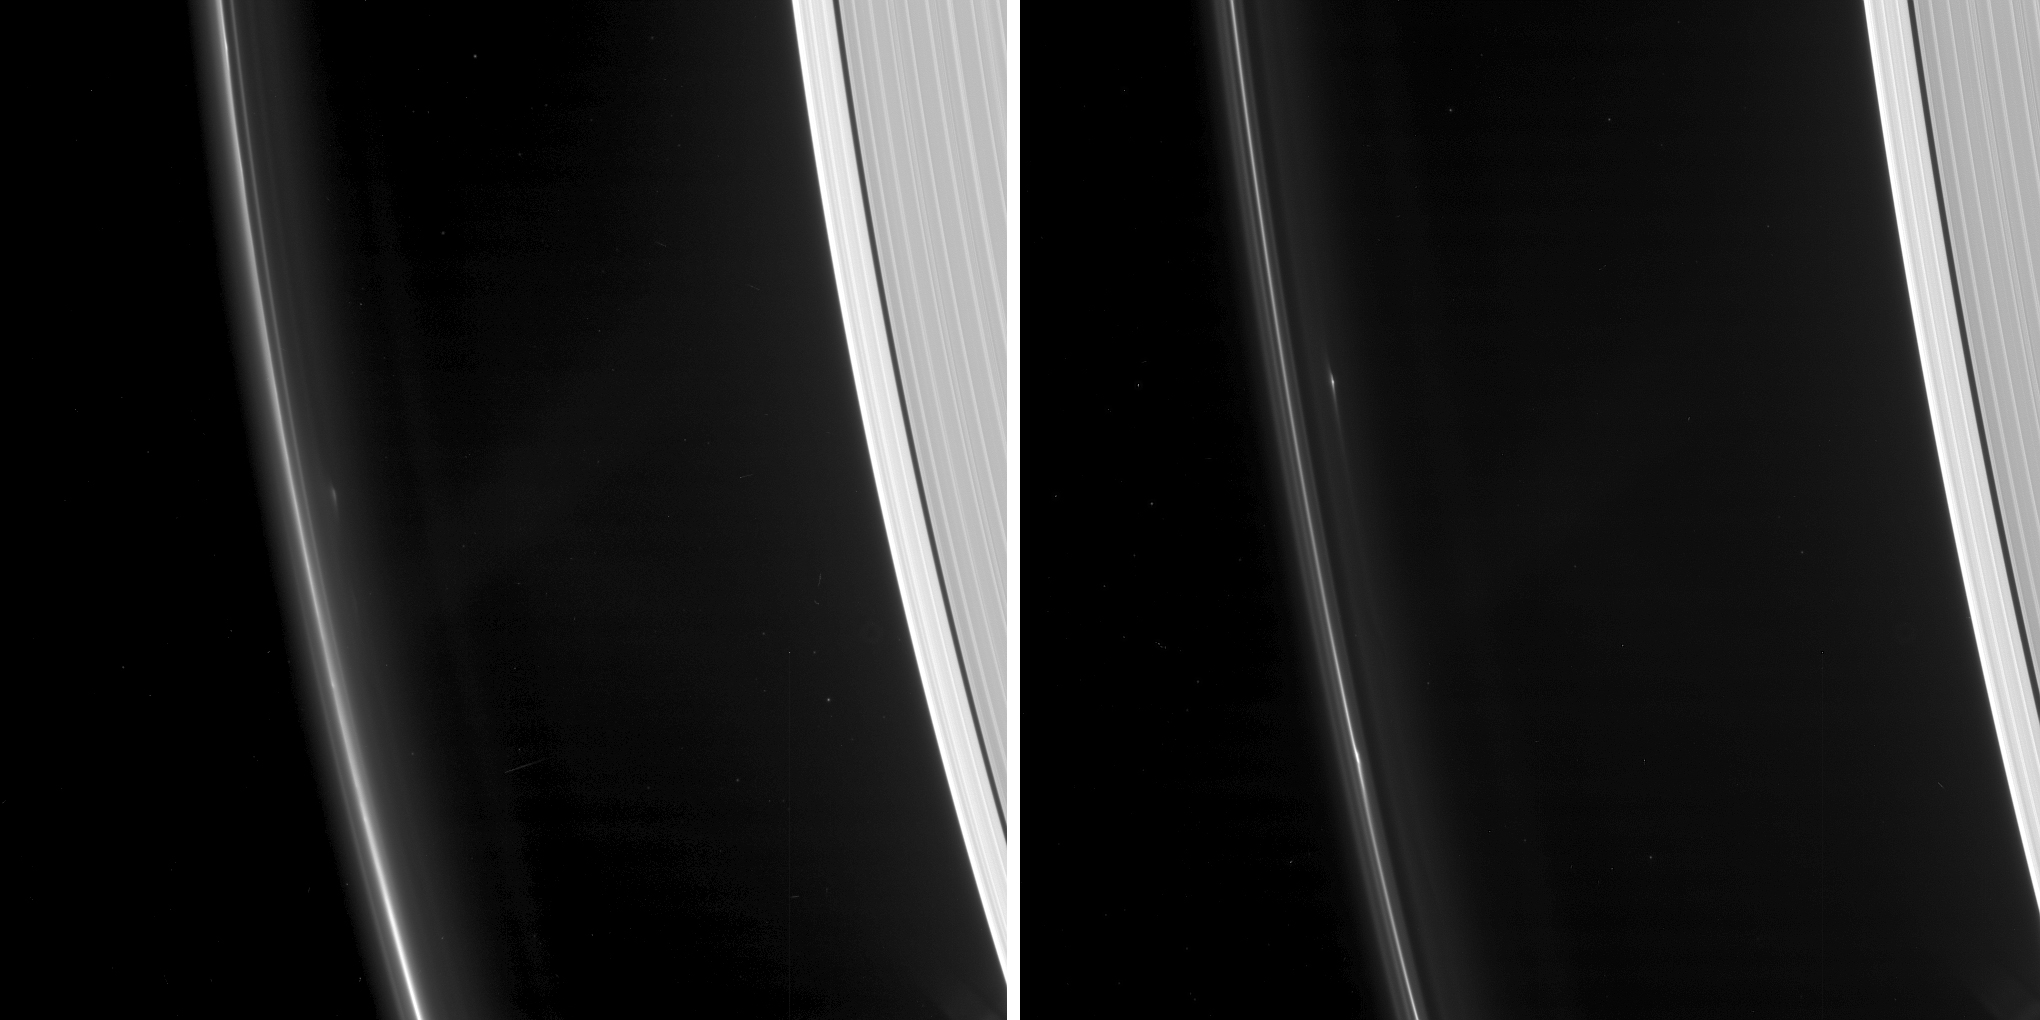 Two sets of images of objects found in Saturn's F ring